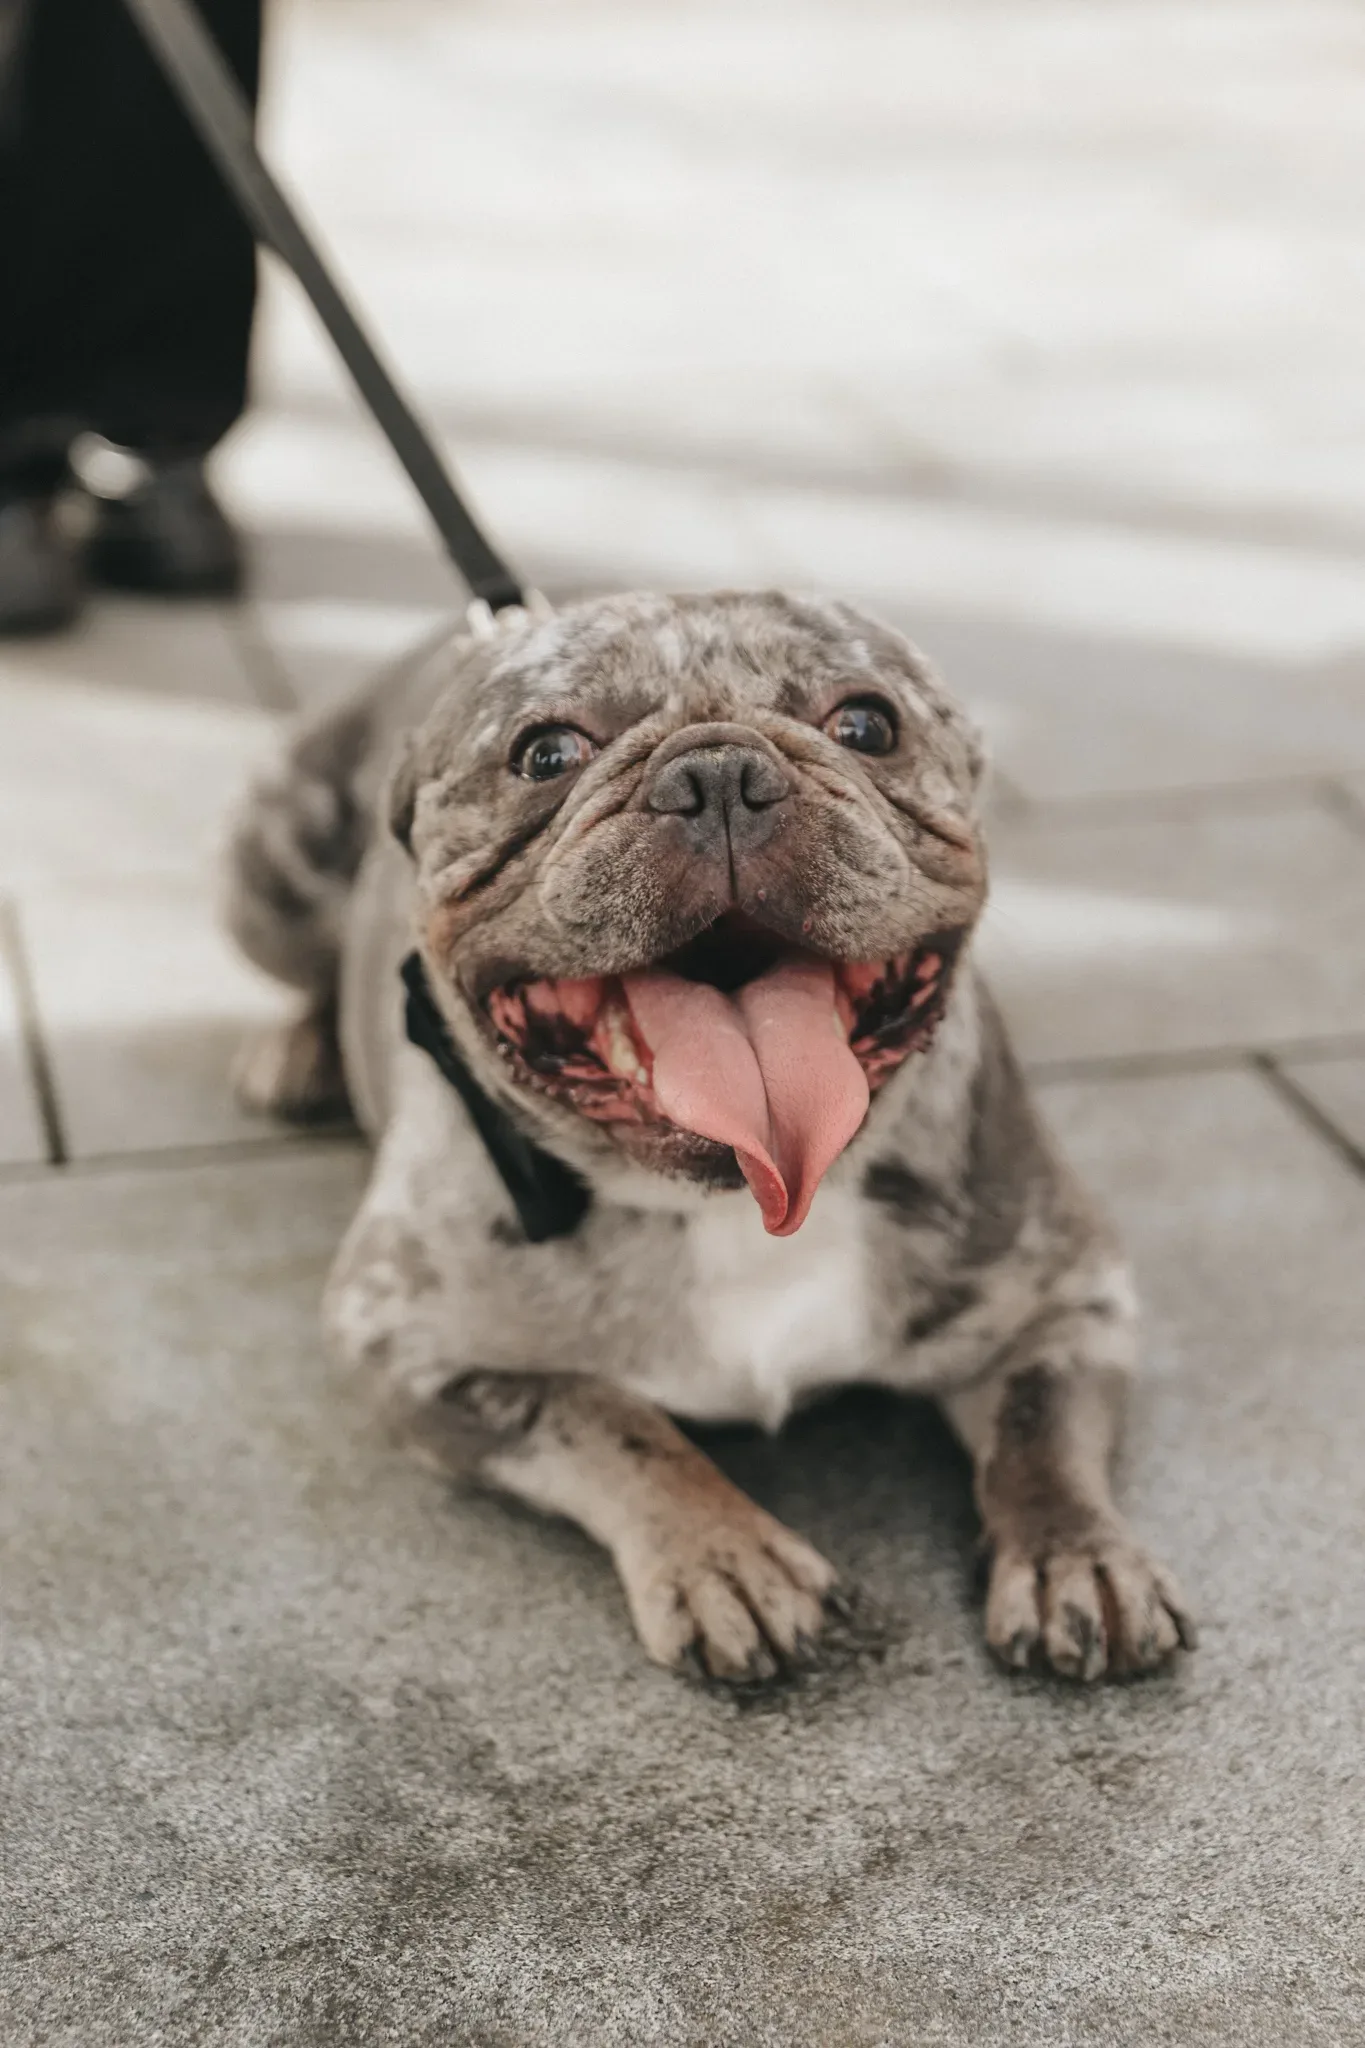 A joyful bulldog with a mottled gray and white coat lies on a pavement, tongue out and looking upward, with a focused expression and excitement evident in its wide eyes, secured by a black leash.